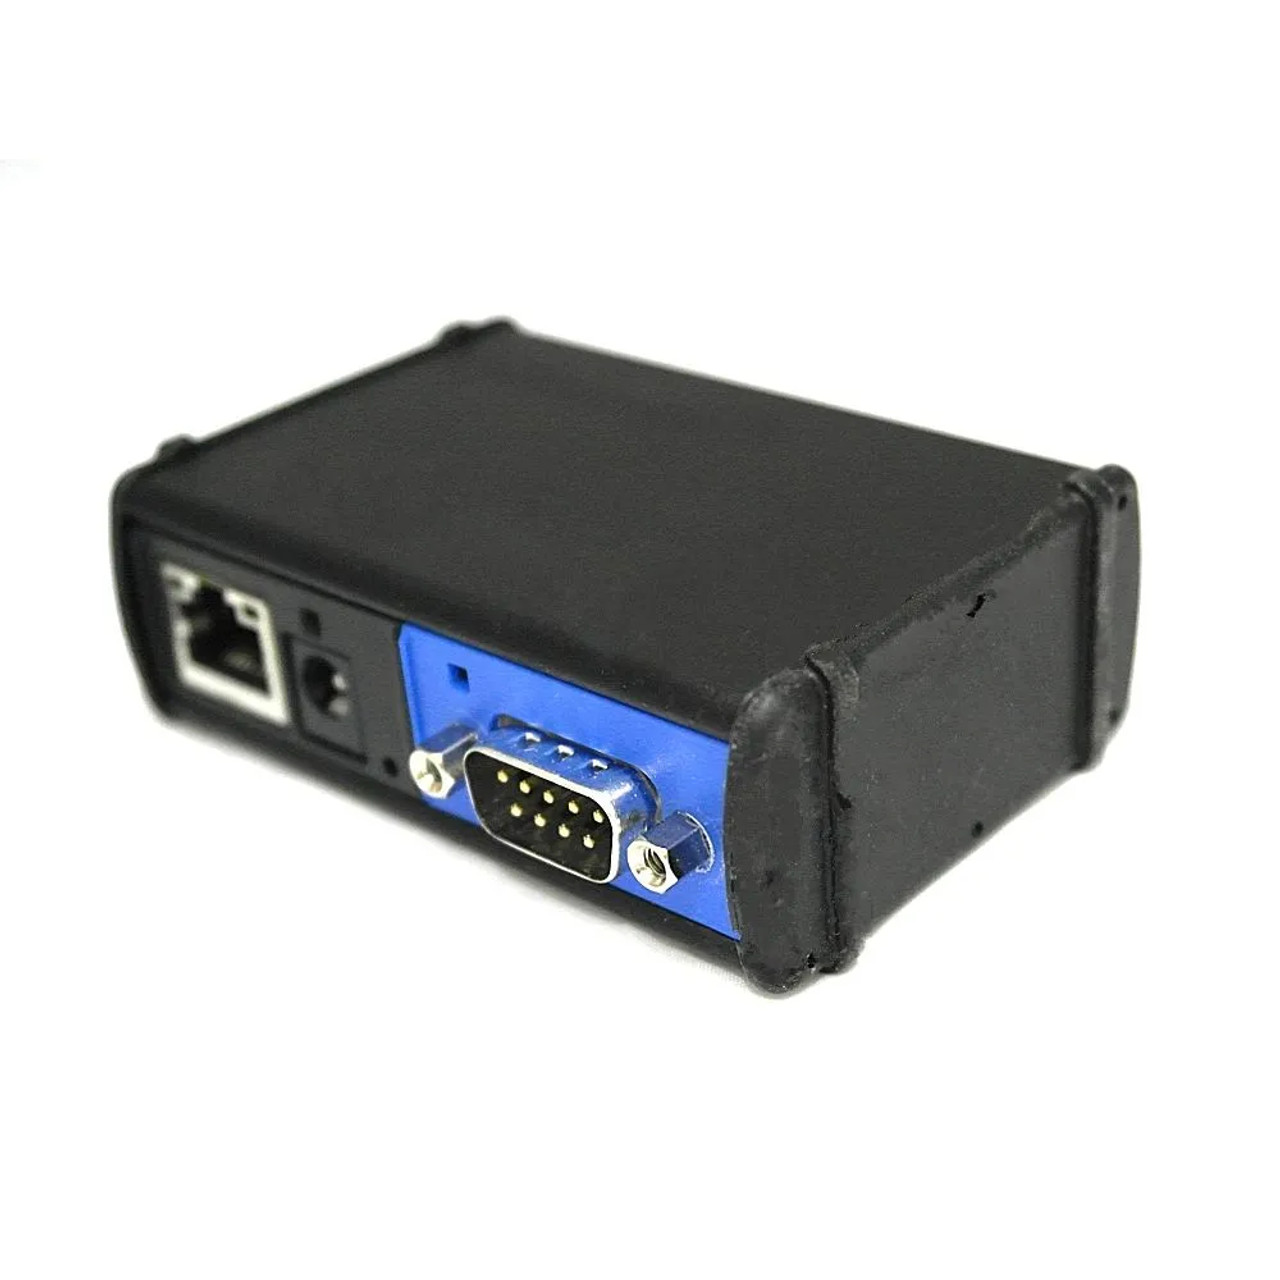 Global Cache IP2SL iTach TCP/IP To Serial RS232 Module (PoE Optional)